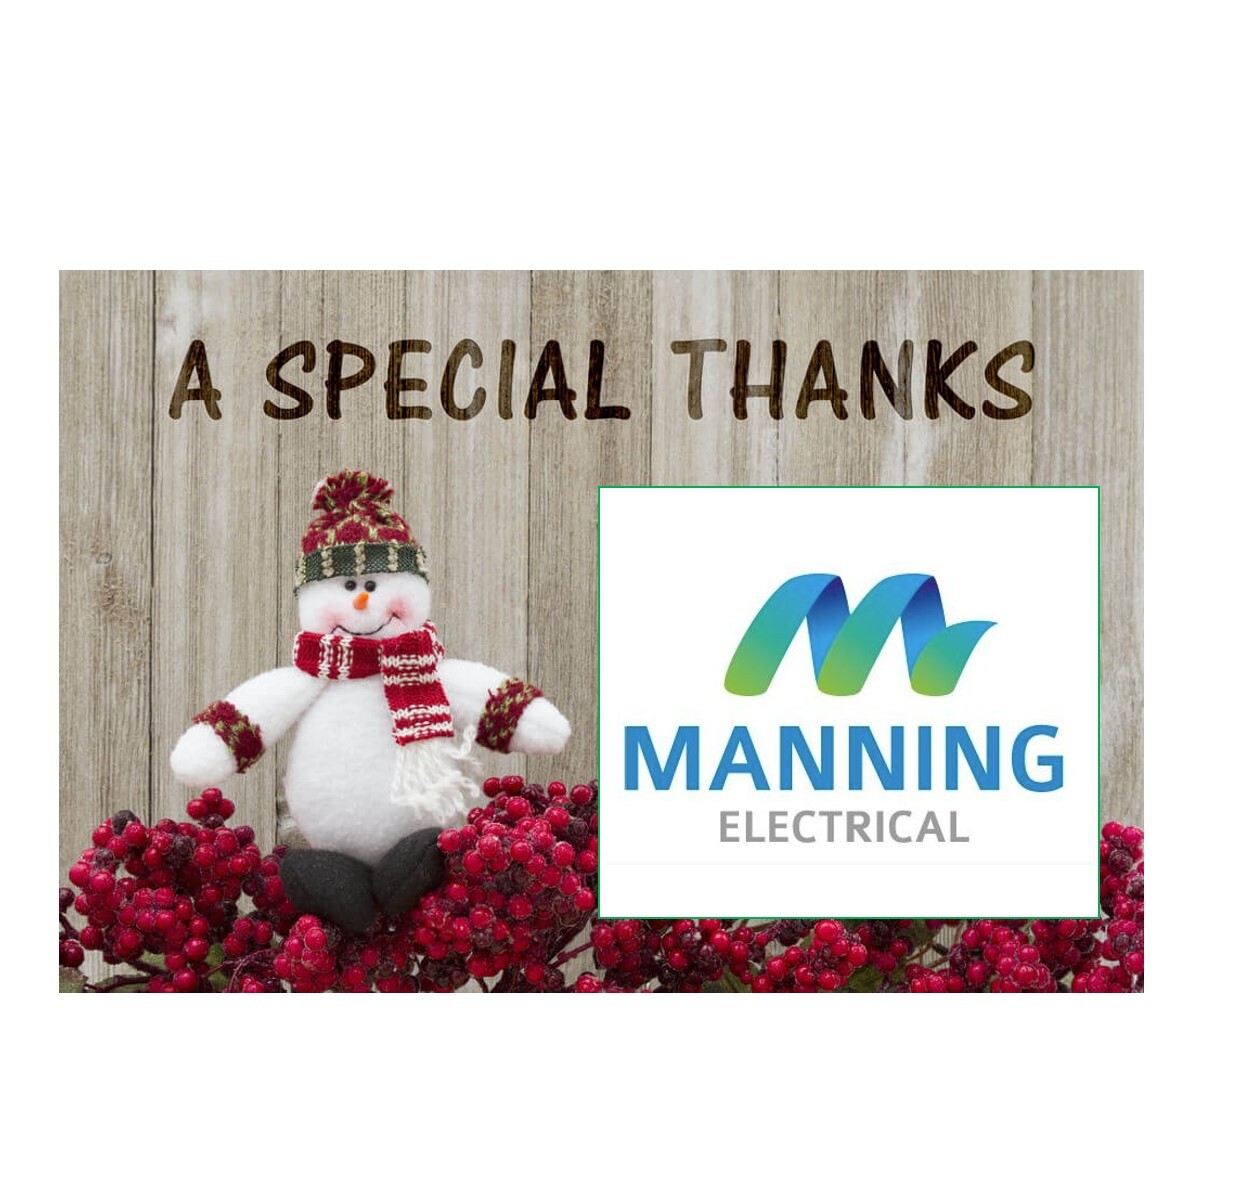 Manning electrical